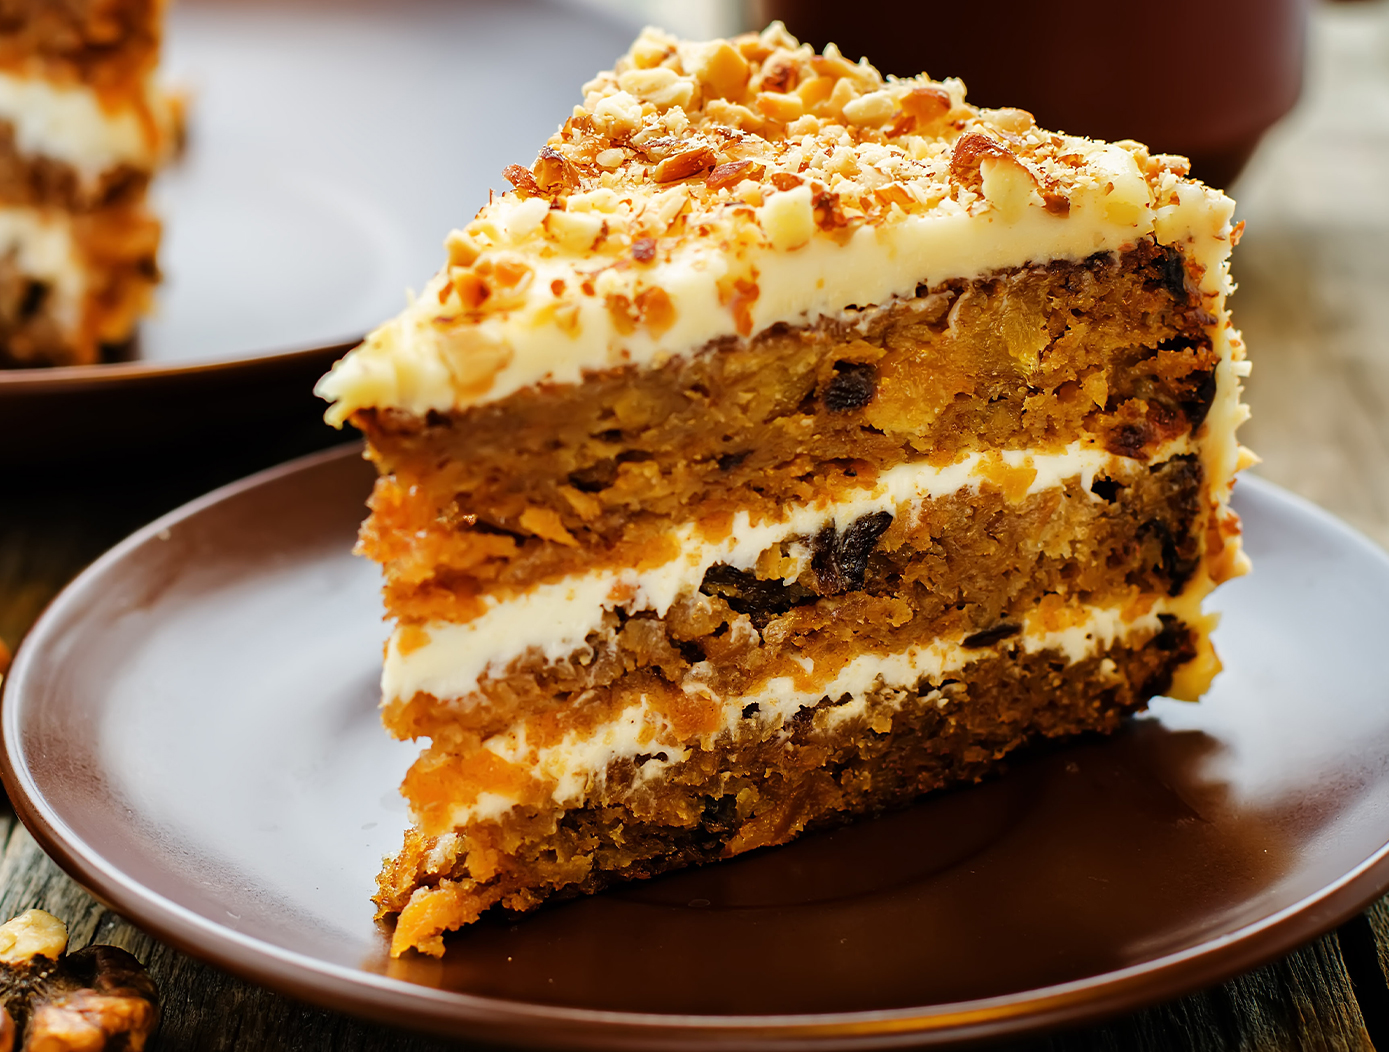 Carrot Cake from the Wholesale Bakery Suppliers UK